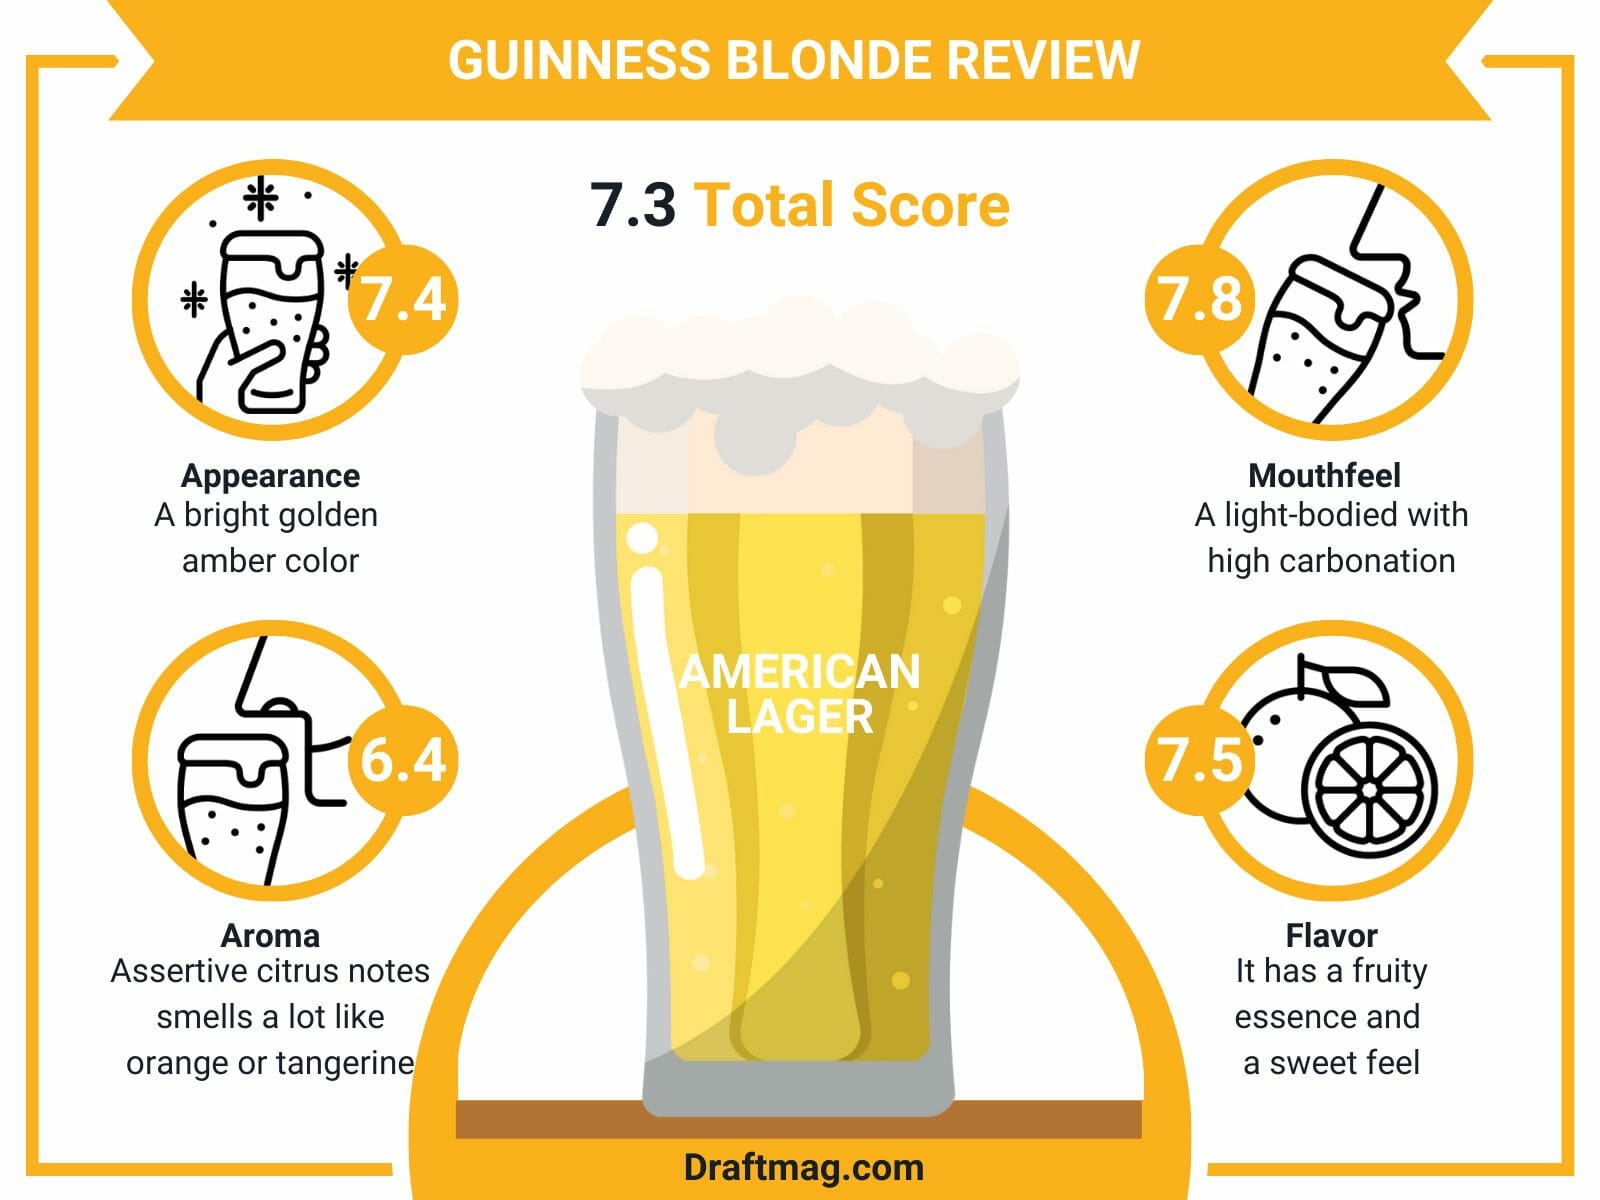 Guinness blonde review infographic